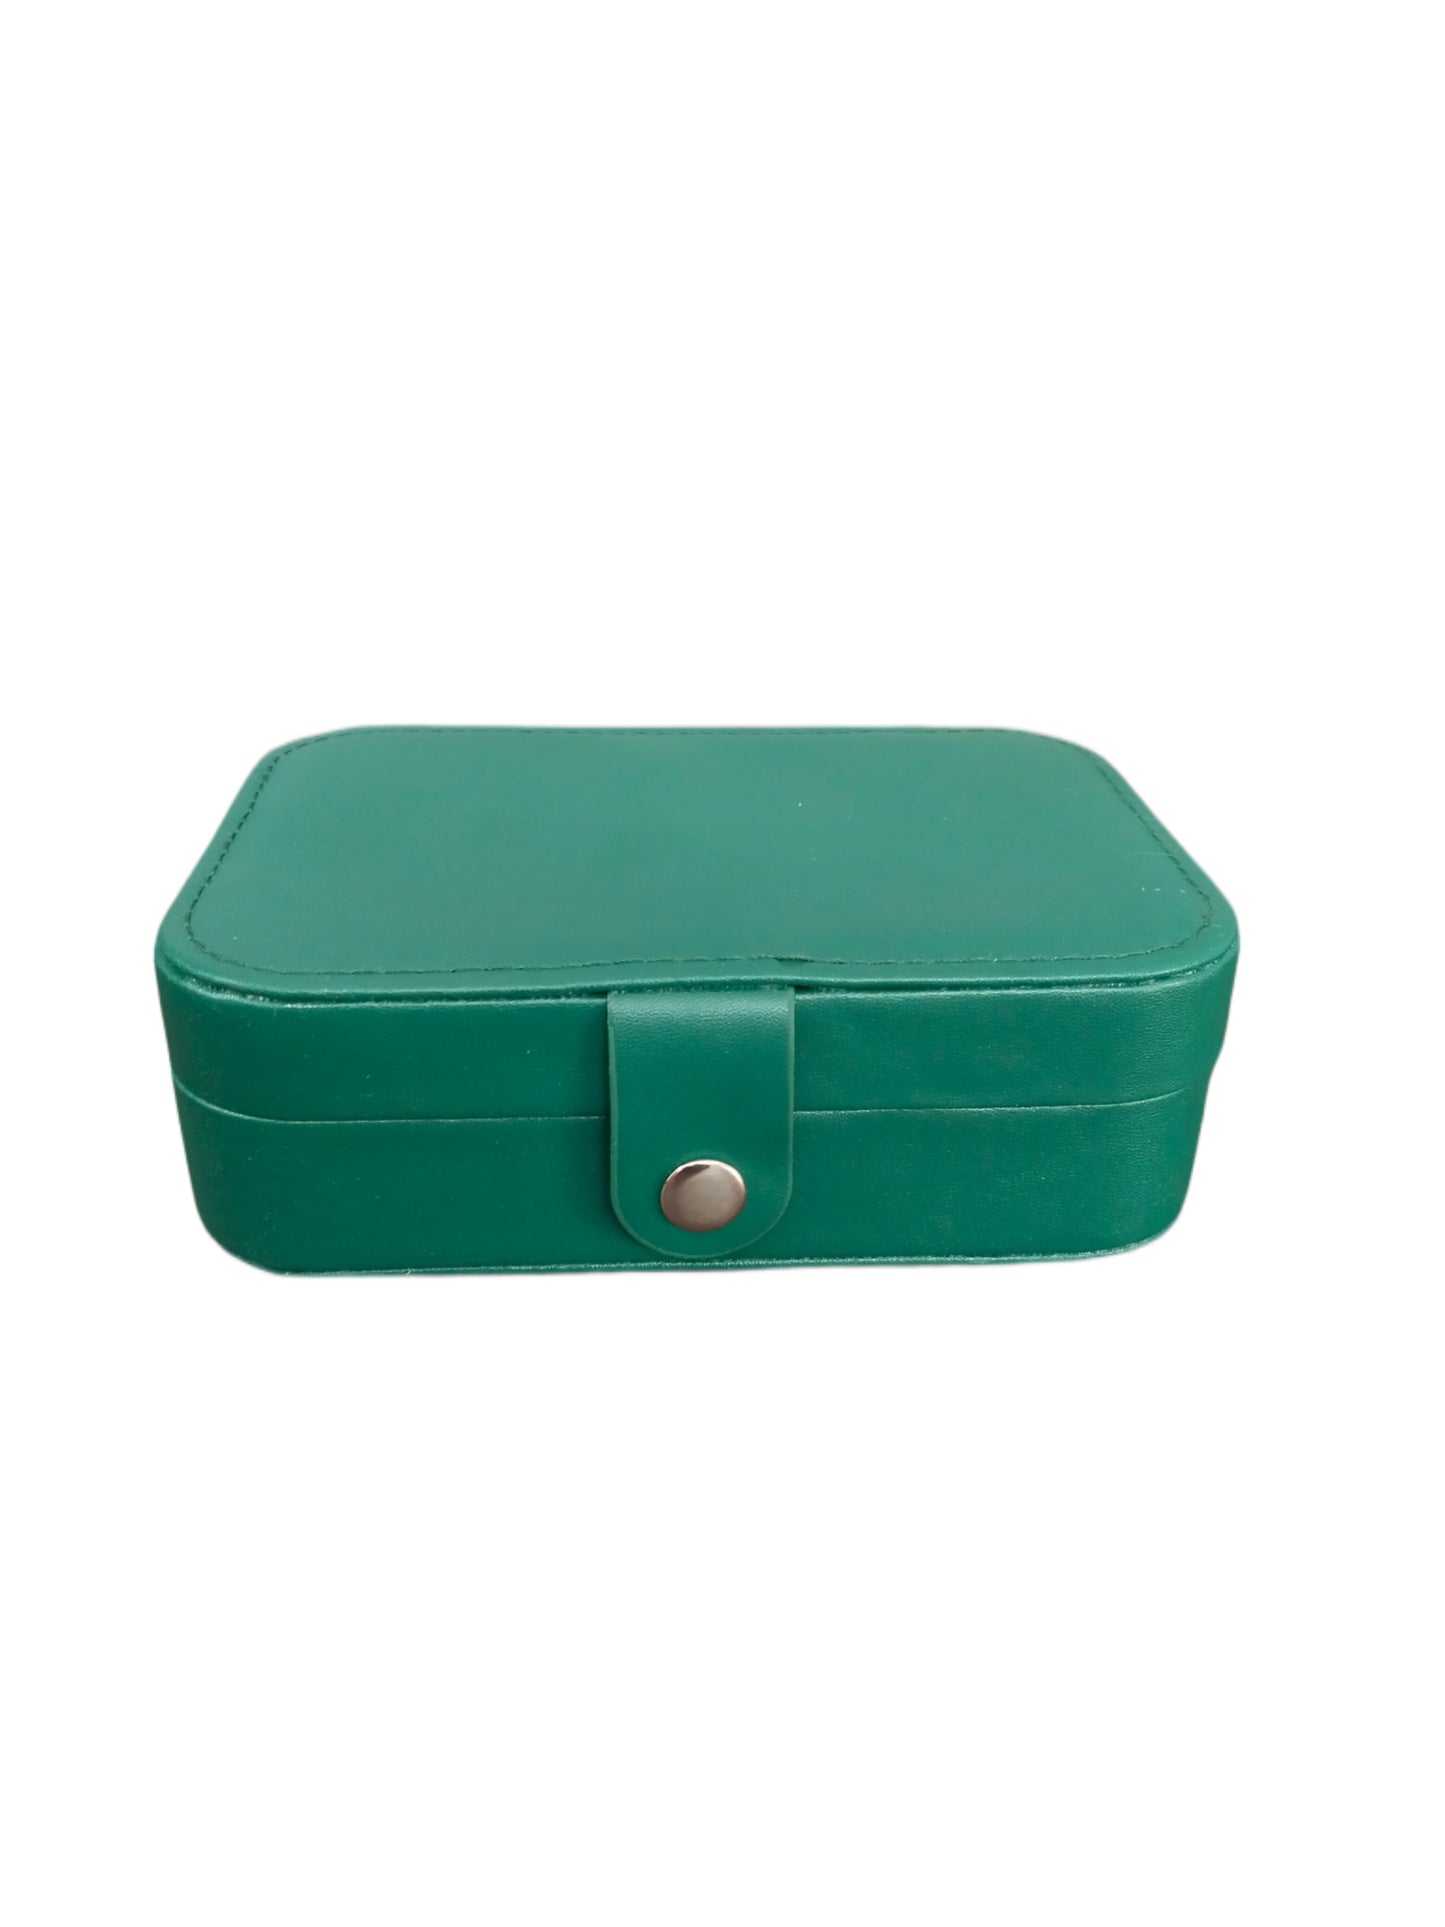 Green-and-White-color-jewellery-box-filled-with-earrings-and-rings jewellery-box-design designer-jewellery-box